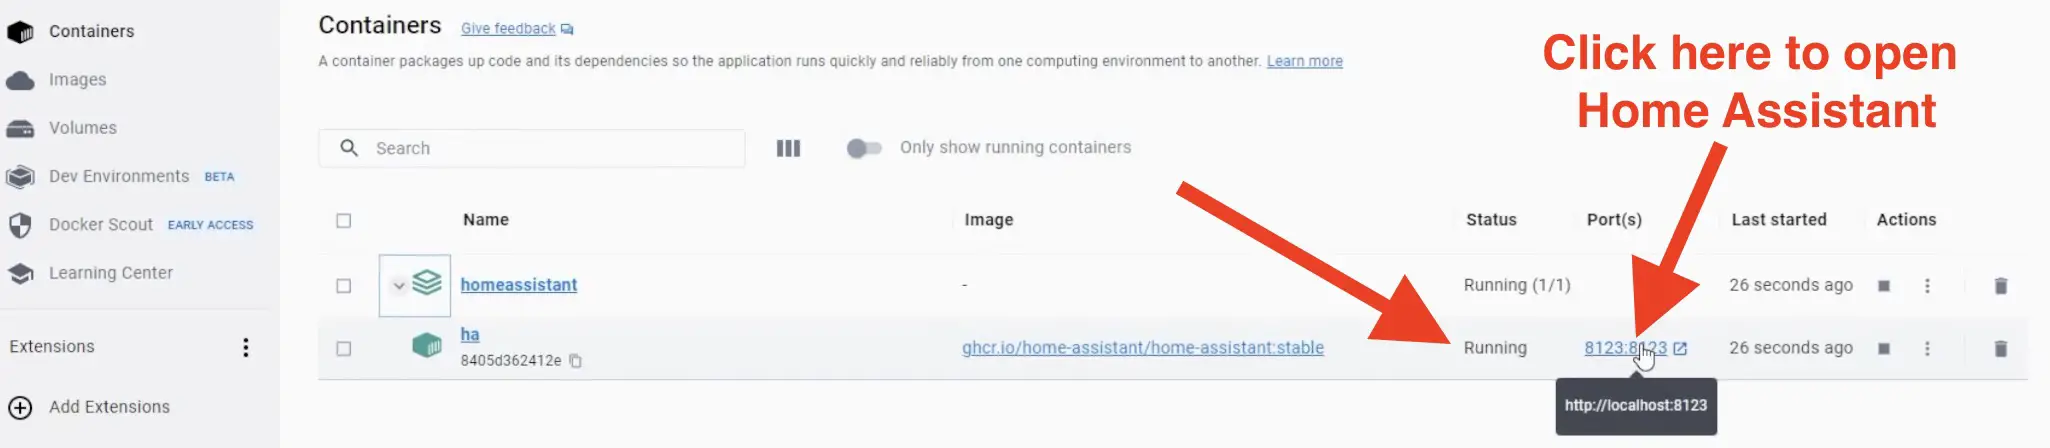 Home Assistant Docker container is running and I can open the Home Assistant Web interface.